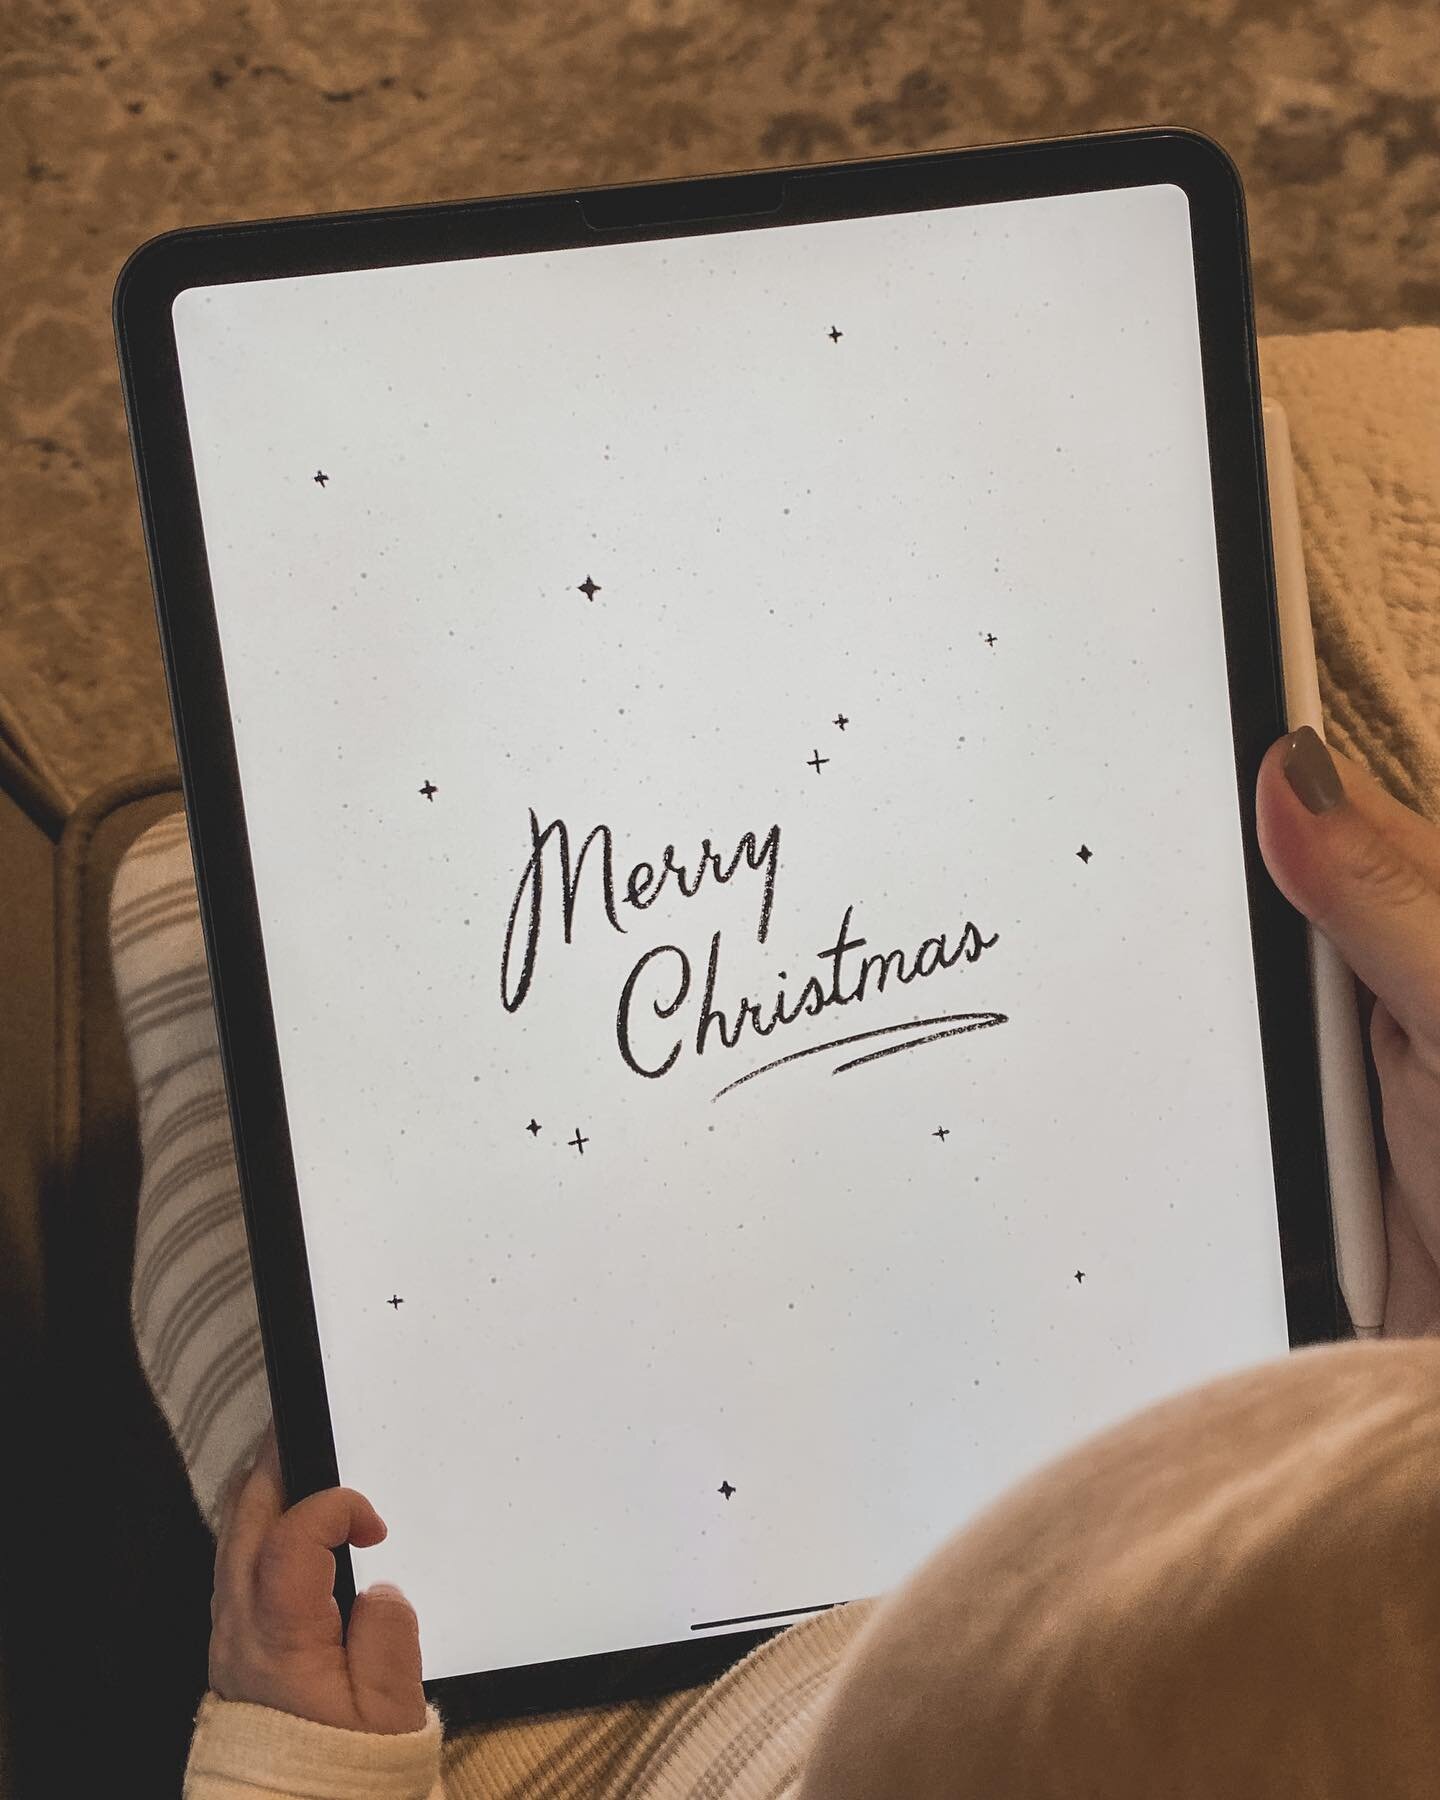 Merry Christmas to you &amp; yours!

+
+
+
+
+
#merrychristmas #christmas #christmasiscoming #createdtocreate #creativelifehappylife #graphicdesign #designeveryday #create #lettering #procreate